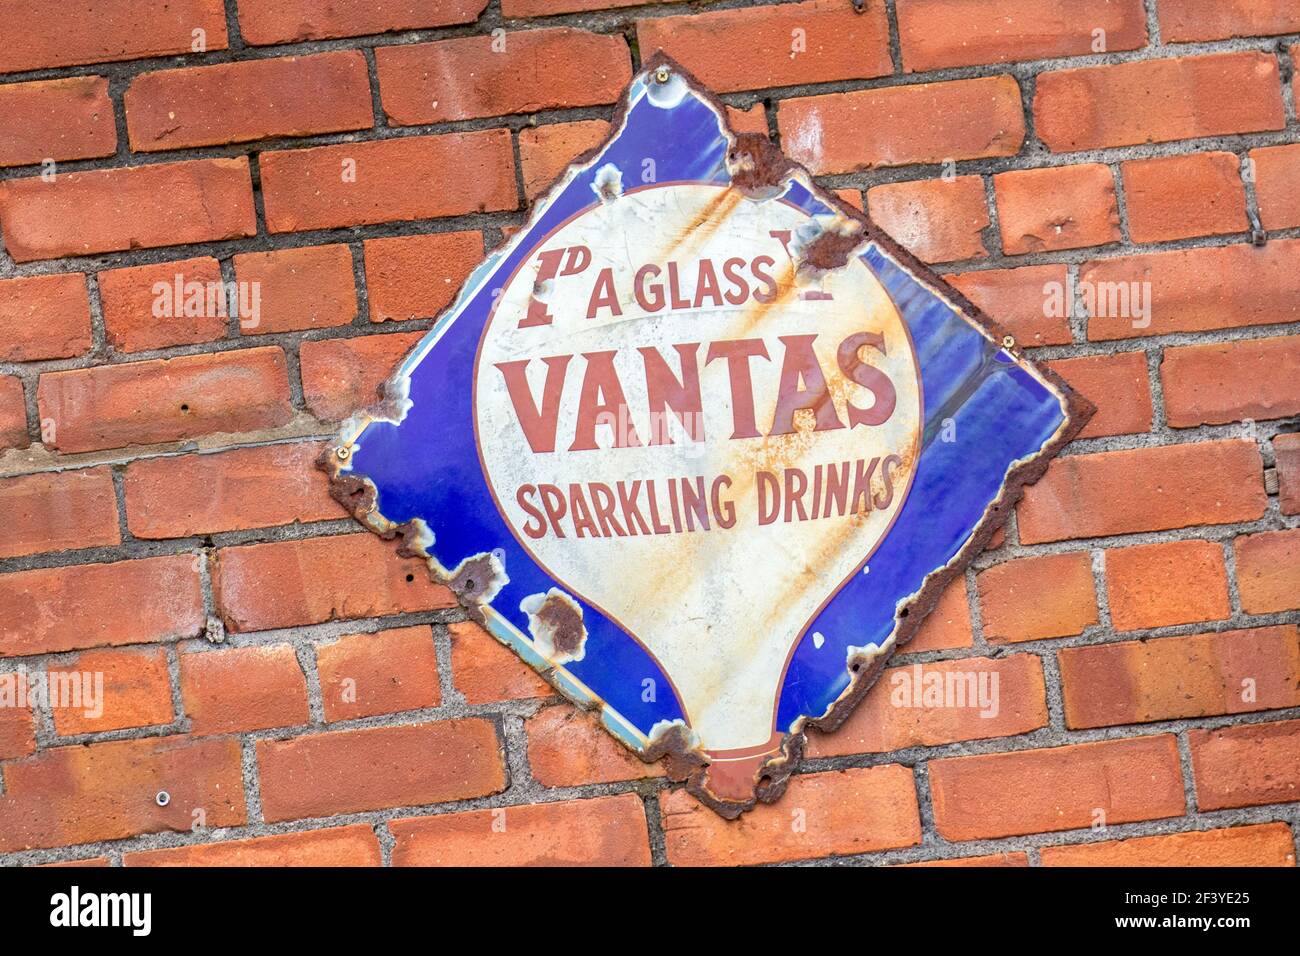 Old penny a glass Vantas Sparkling Drinks metal sign, UK Stock Photo